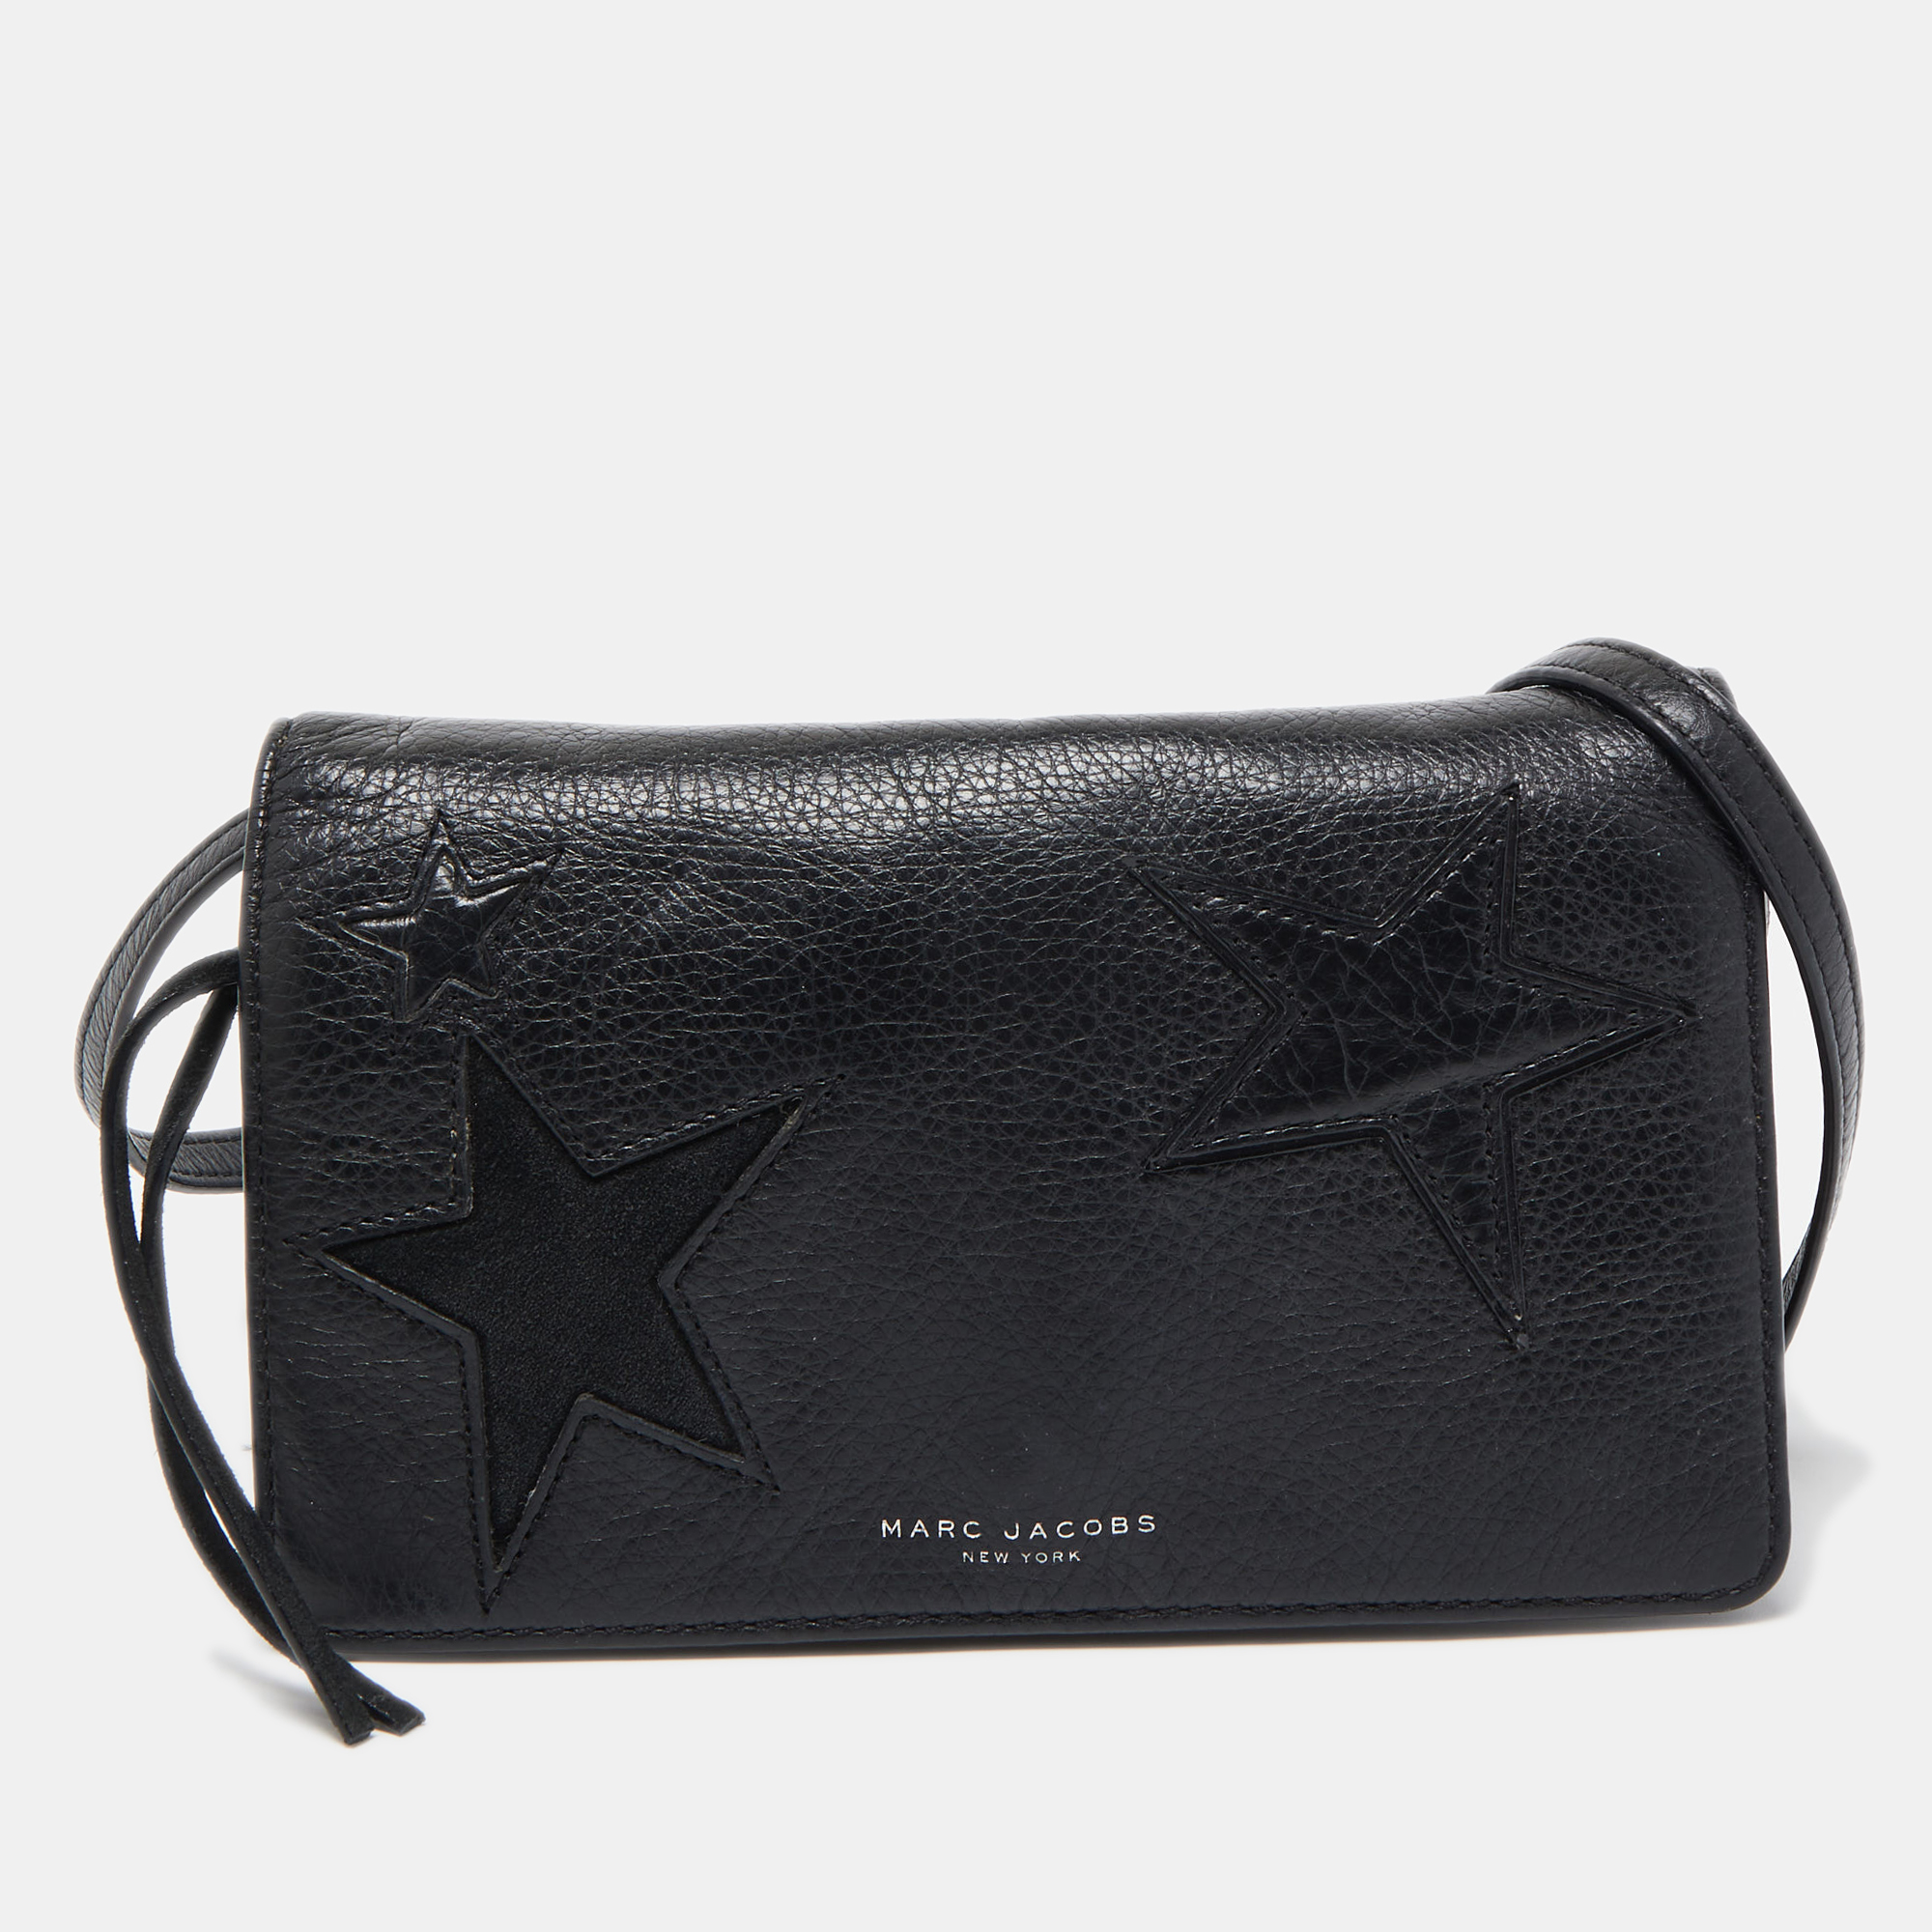 Pre-owned Marc Jacobs Black Star Patchwork Leather Clutch Bag